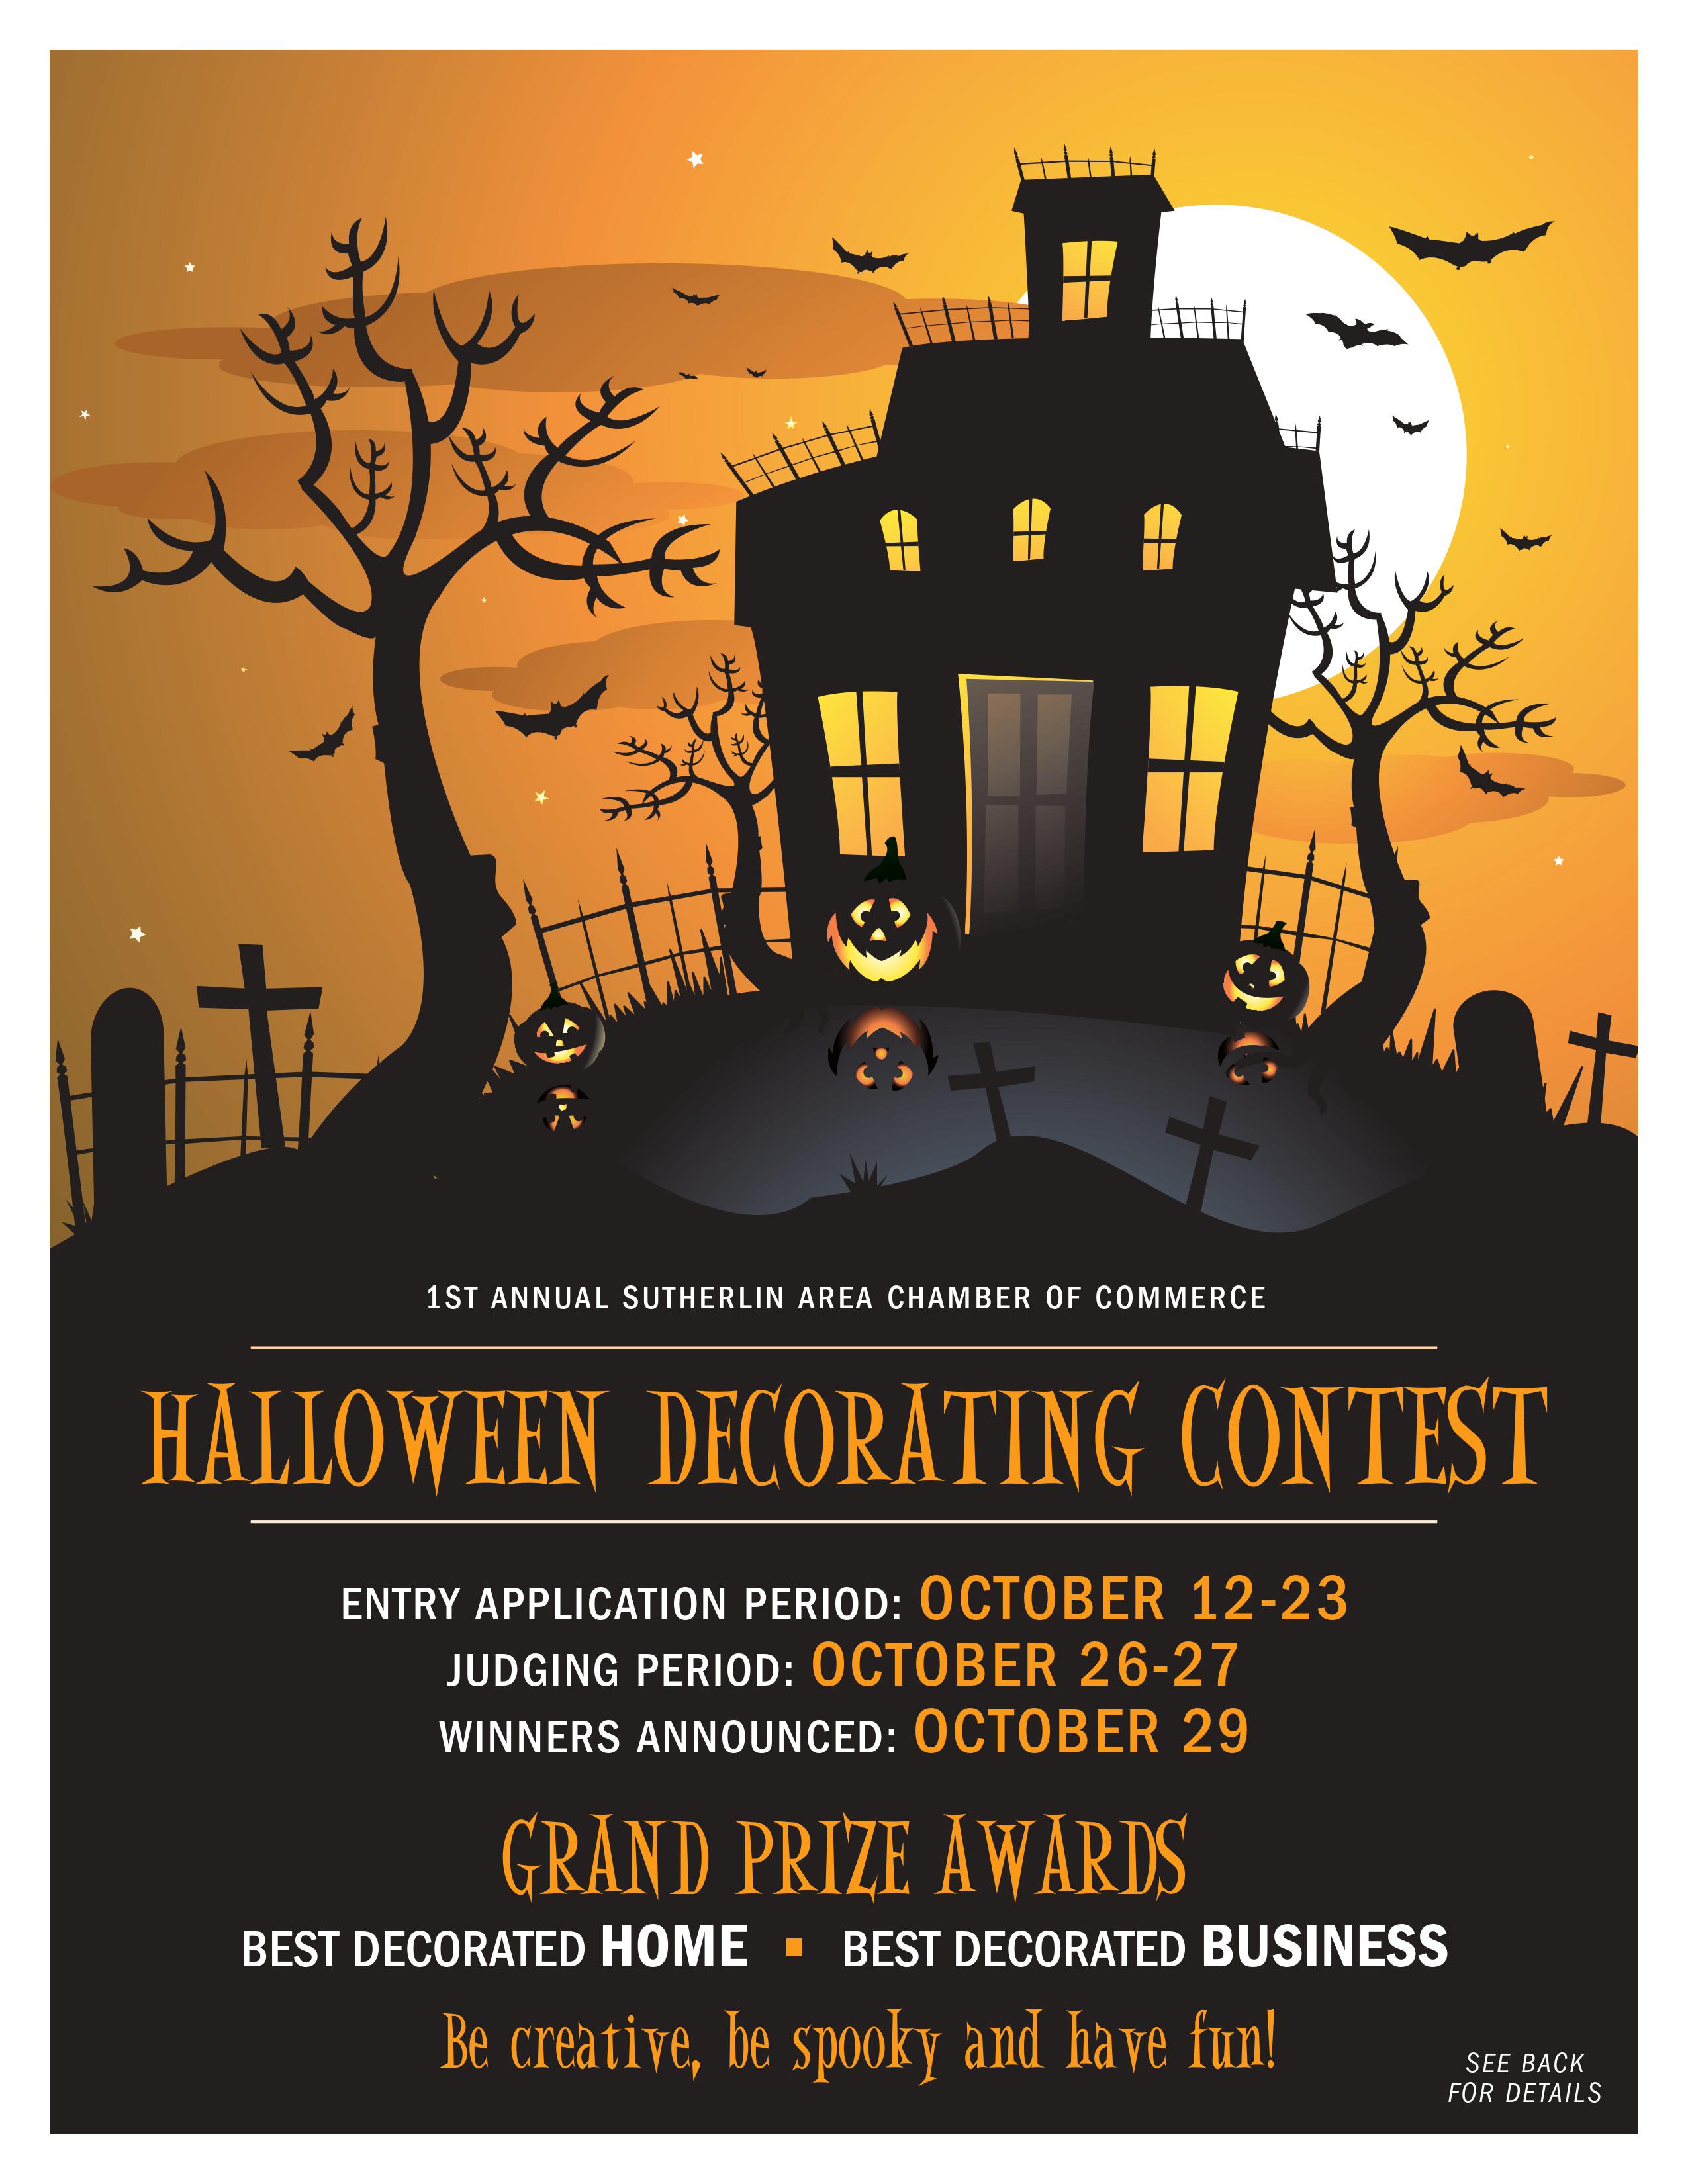 Halloween Decorating Contest - Sutherlin Area Chamber of Commerce